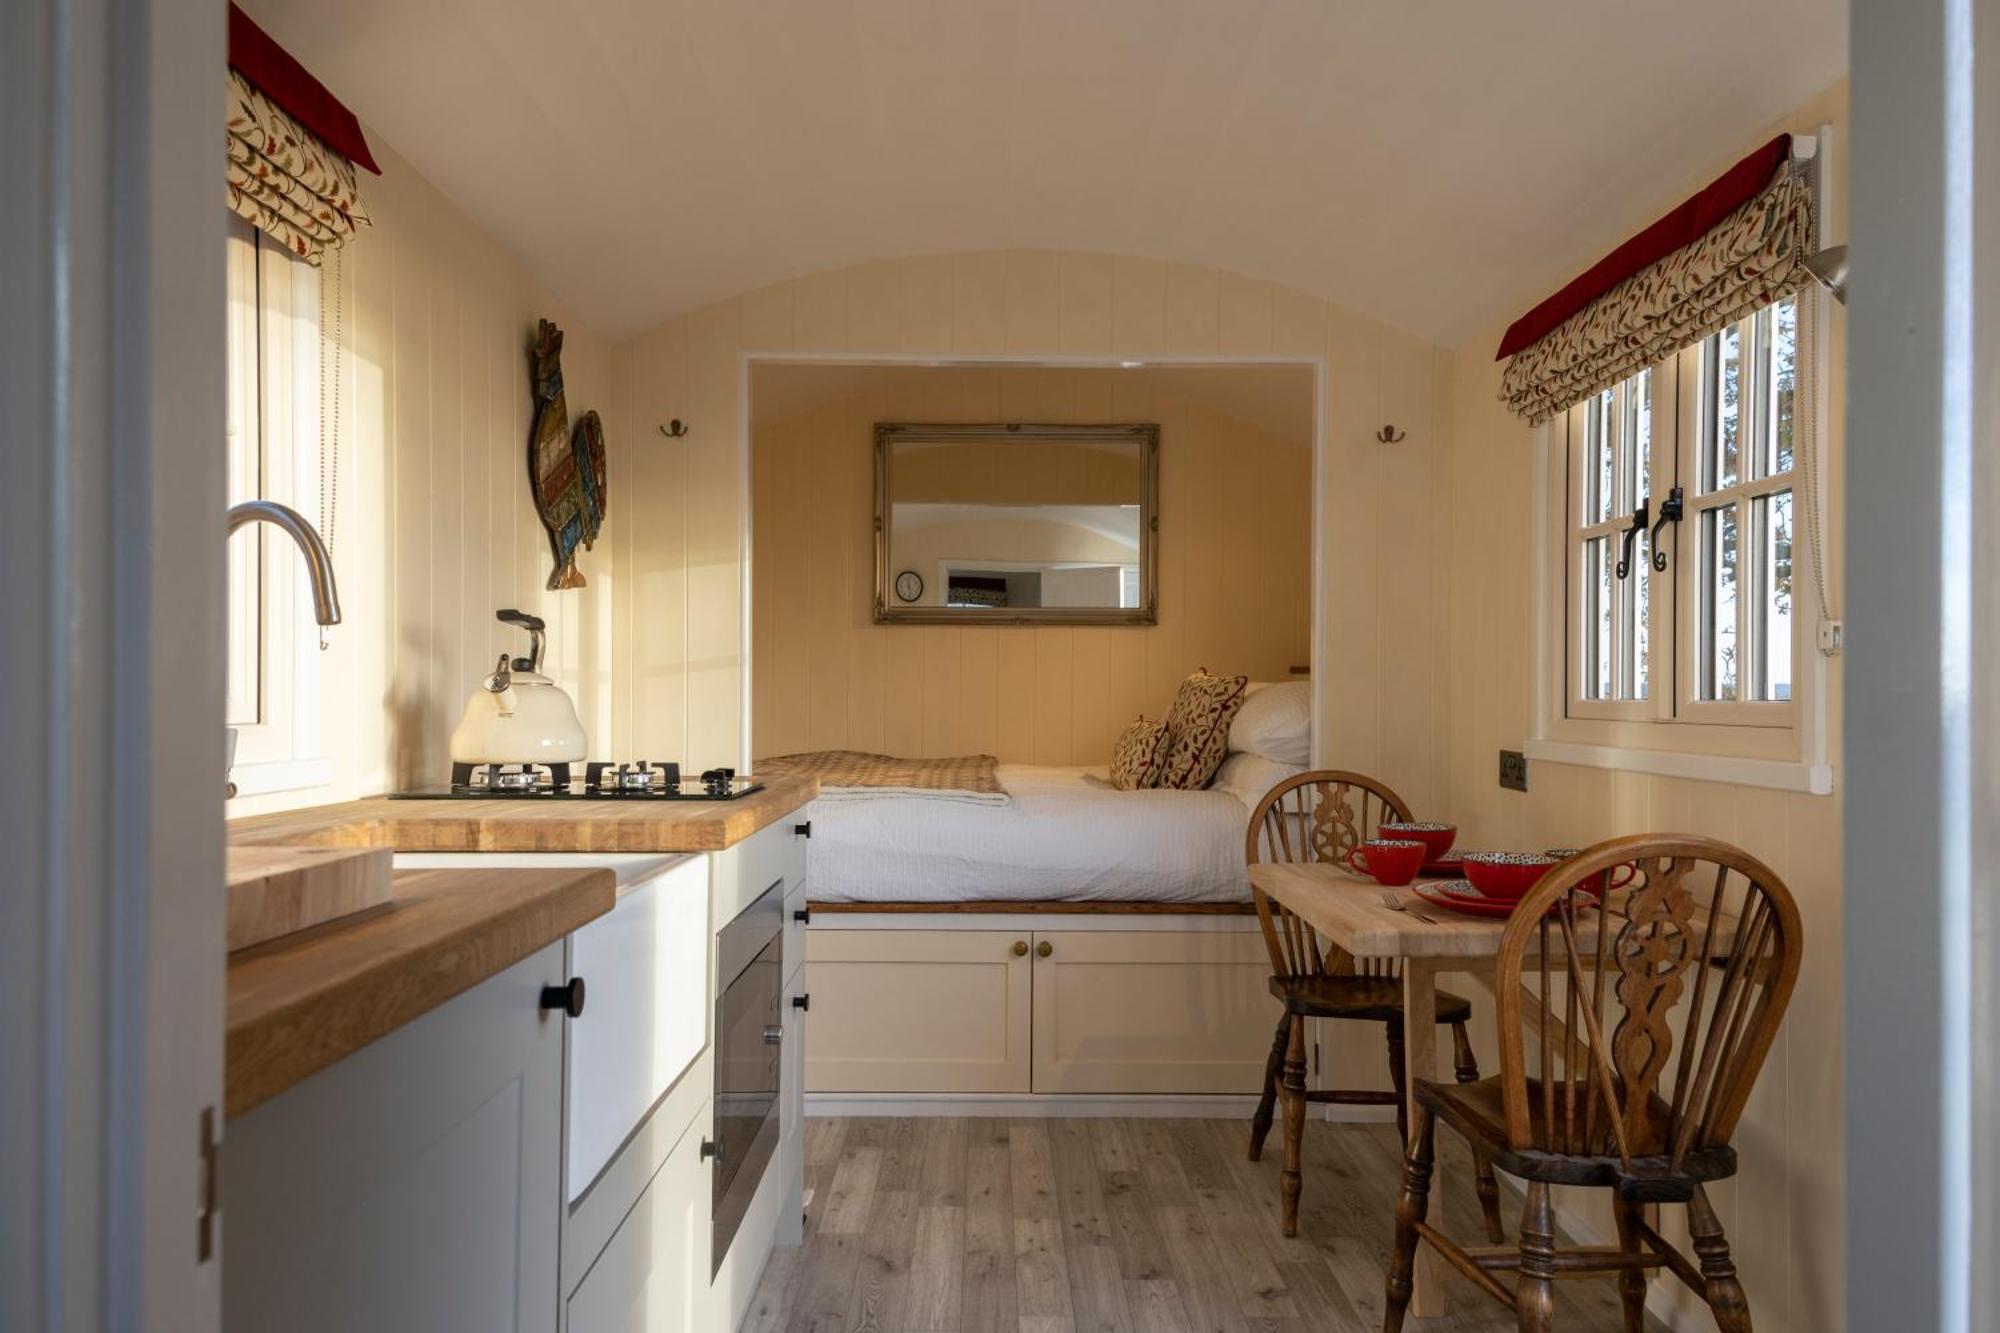 Abbey Farm Glamping & Cottage Thame Zimmer foto